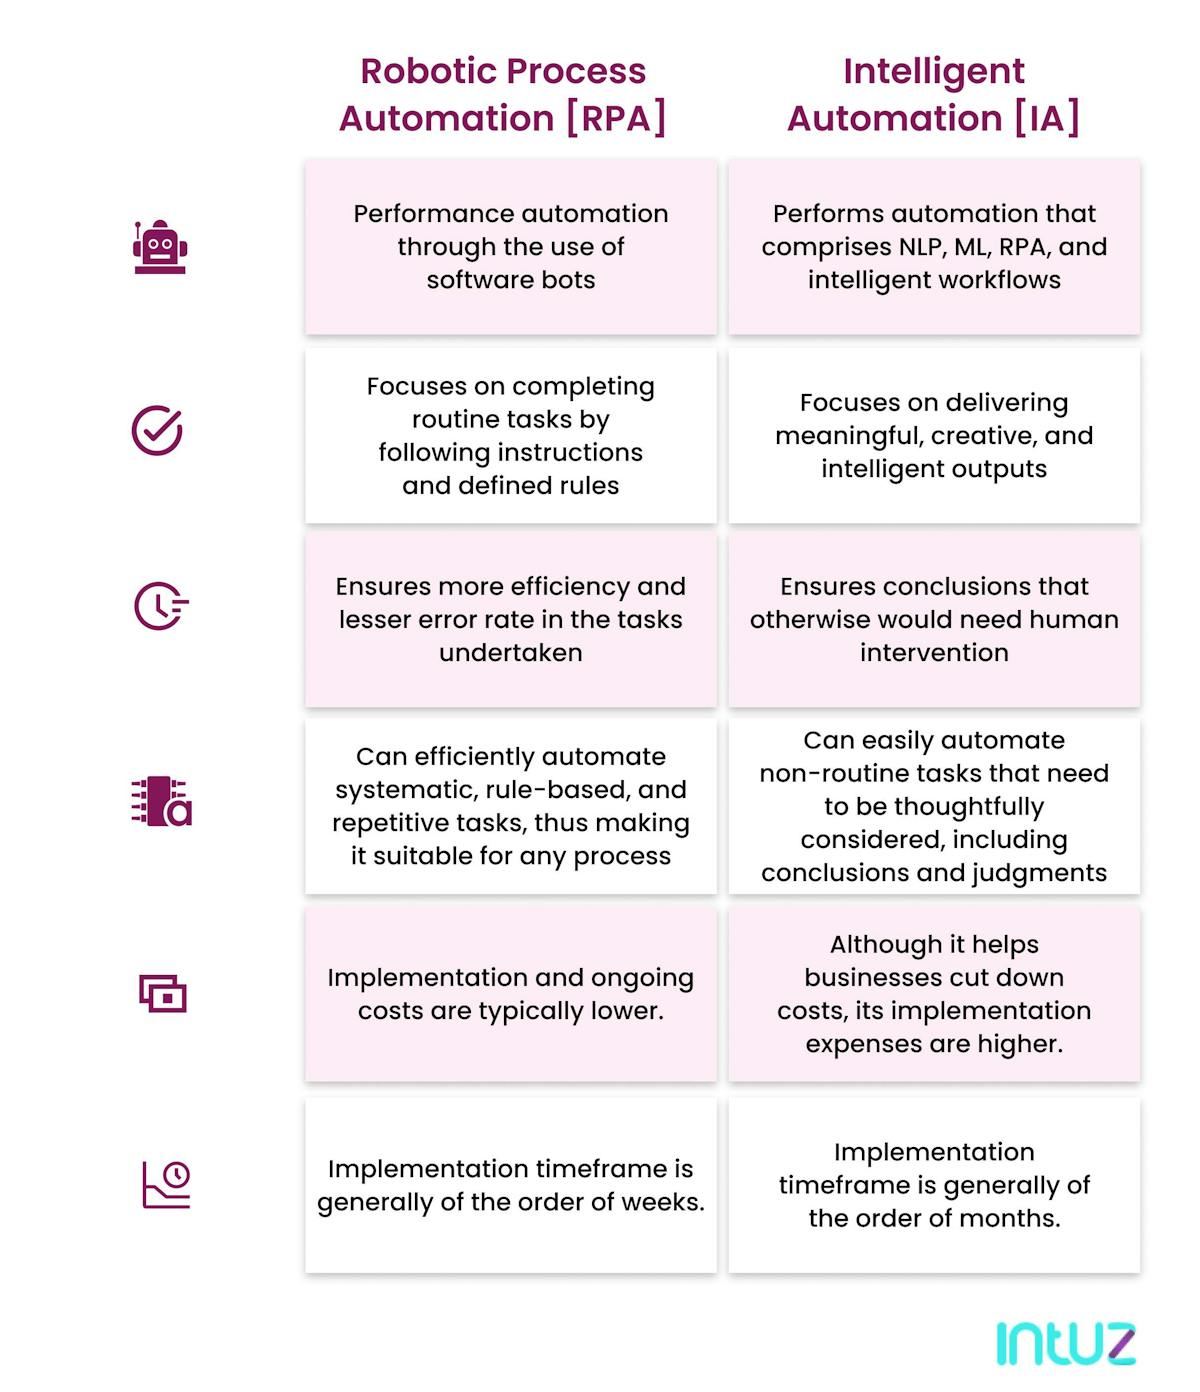 RPA vs. IA: key differences to know